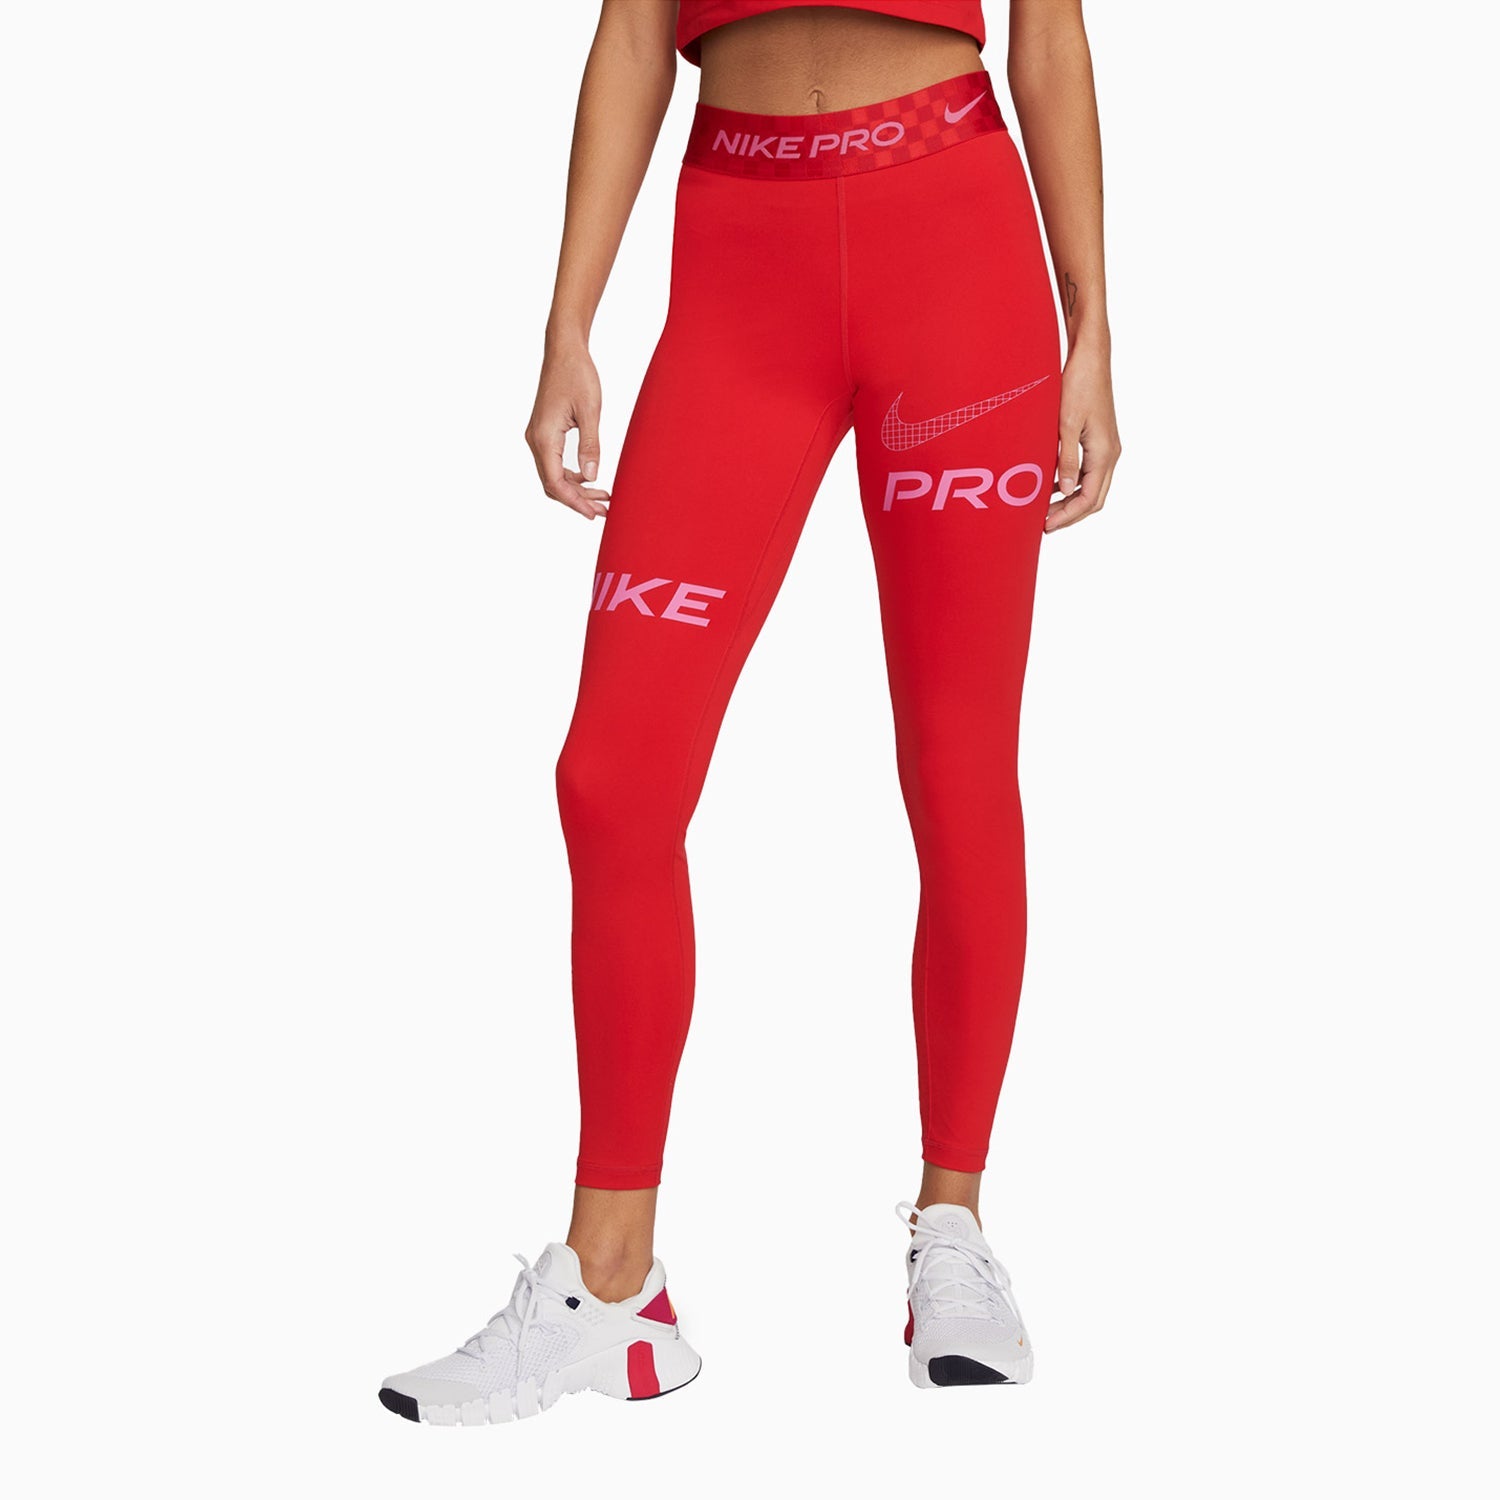 womens-nike-dri-fit-get-fit-graphic-outfit-dx0074-657-dx0080-657